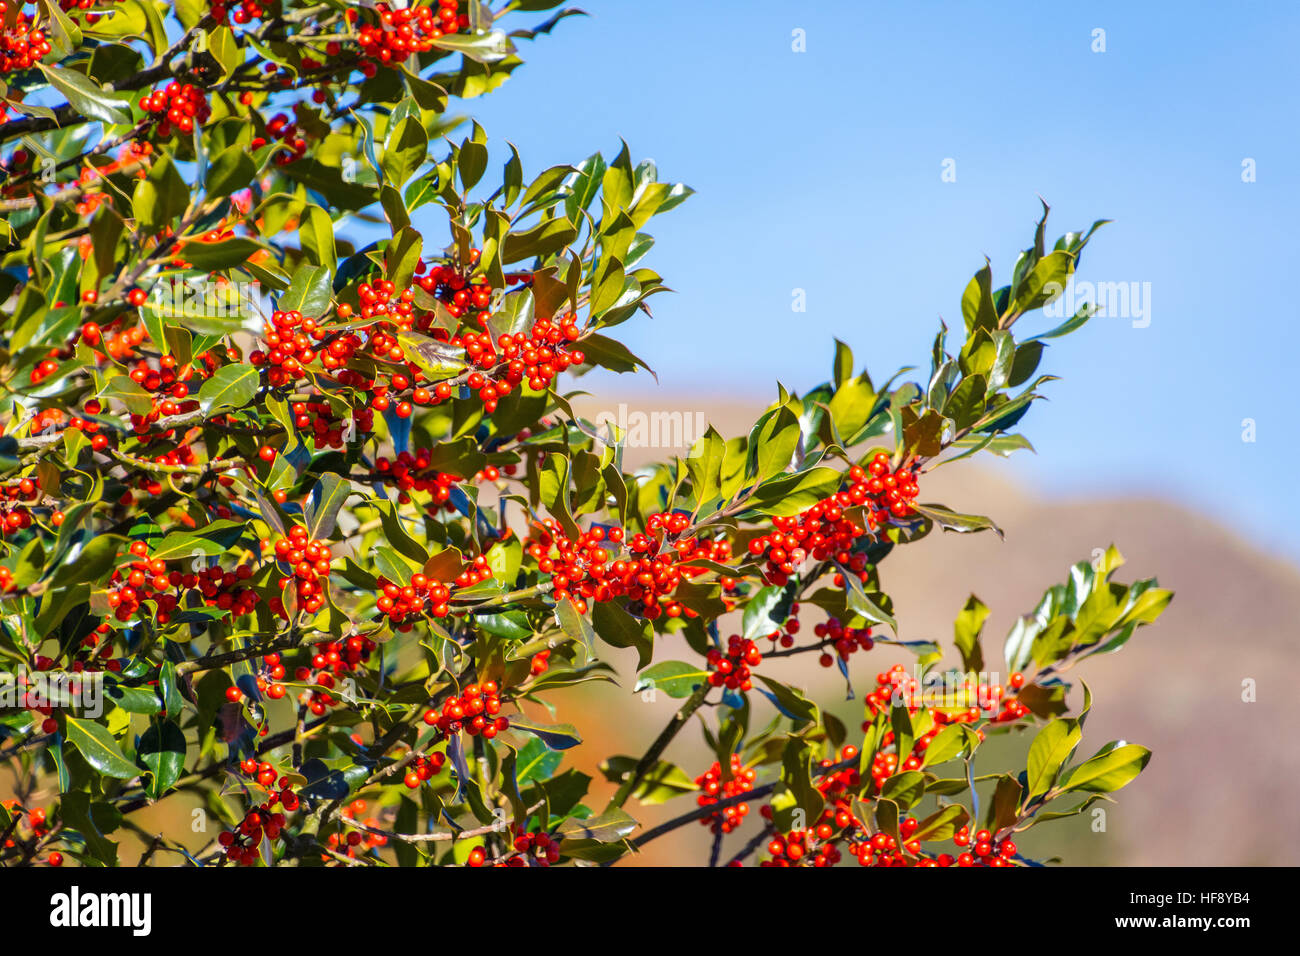 Holly leaves and red berries against blue sky Stock Photo